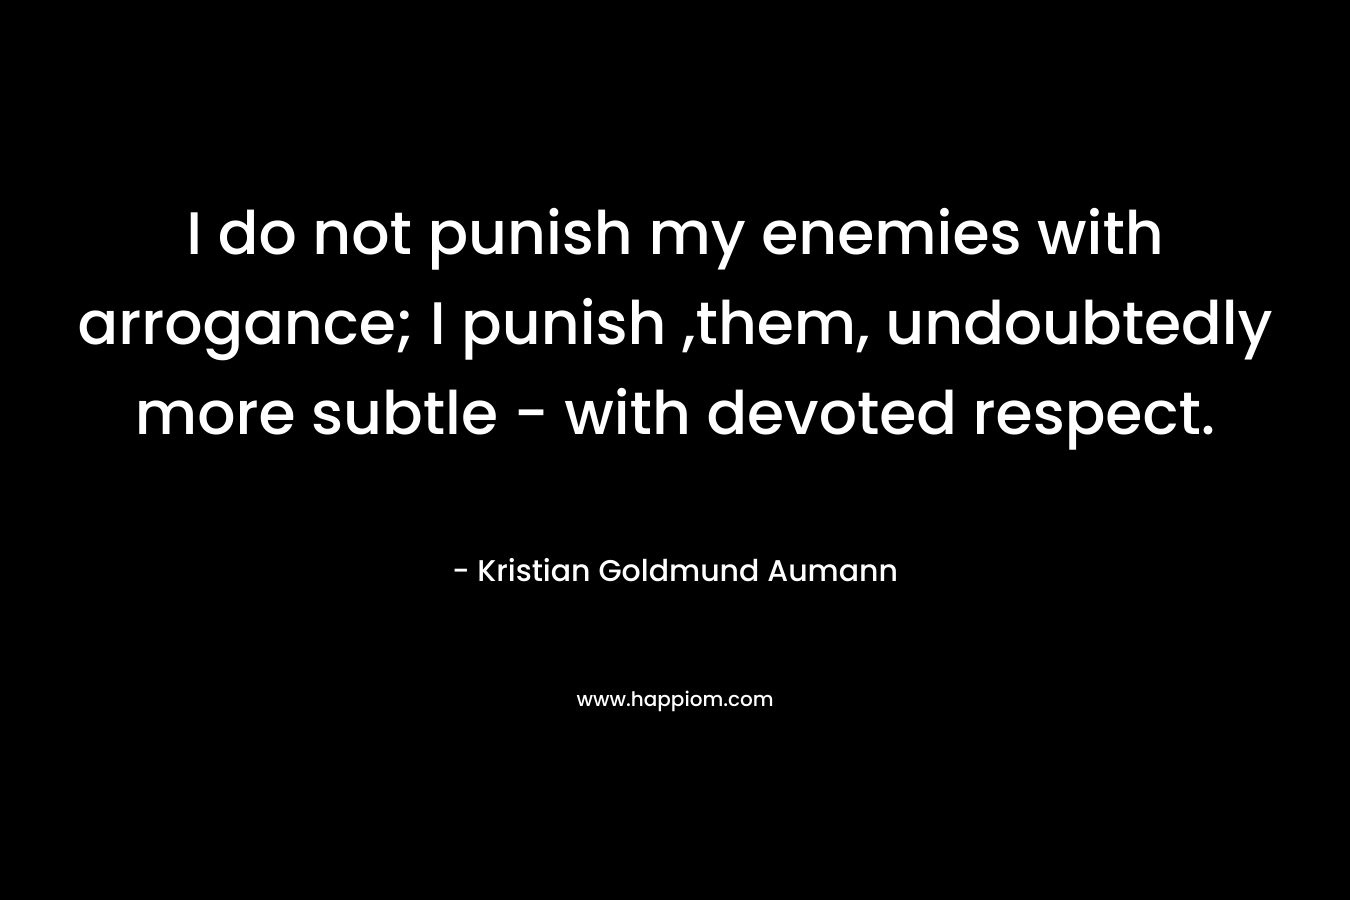 I do not punish my enemies with arrogance; I punish ,them, undoubtedly more subtle - with devoted respect.